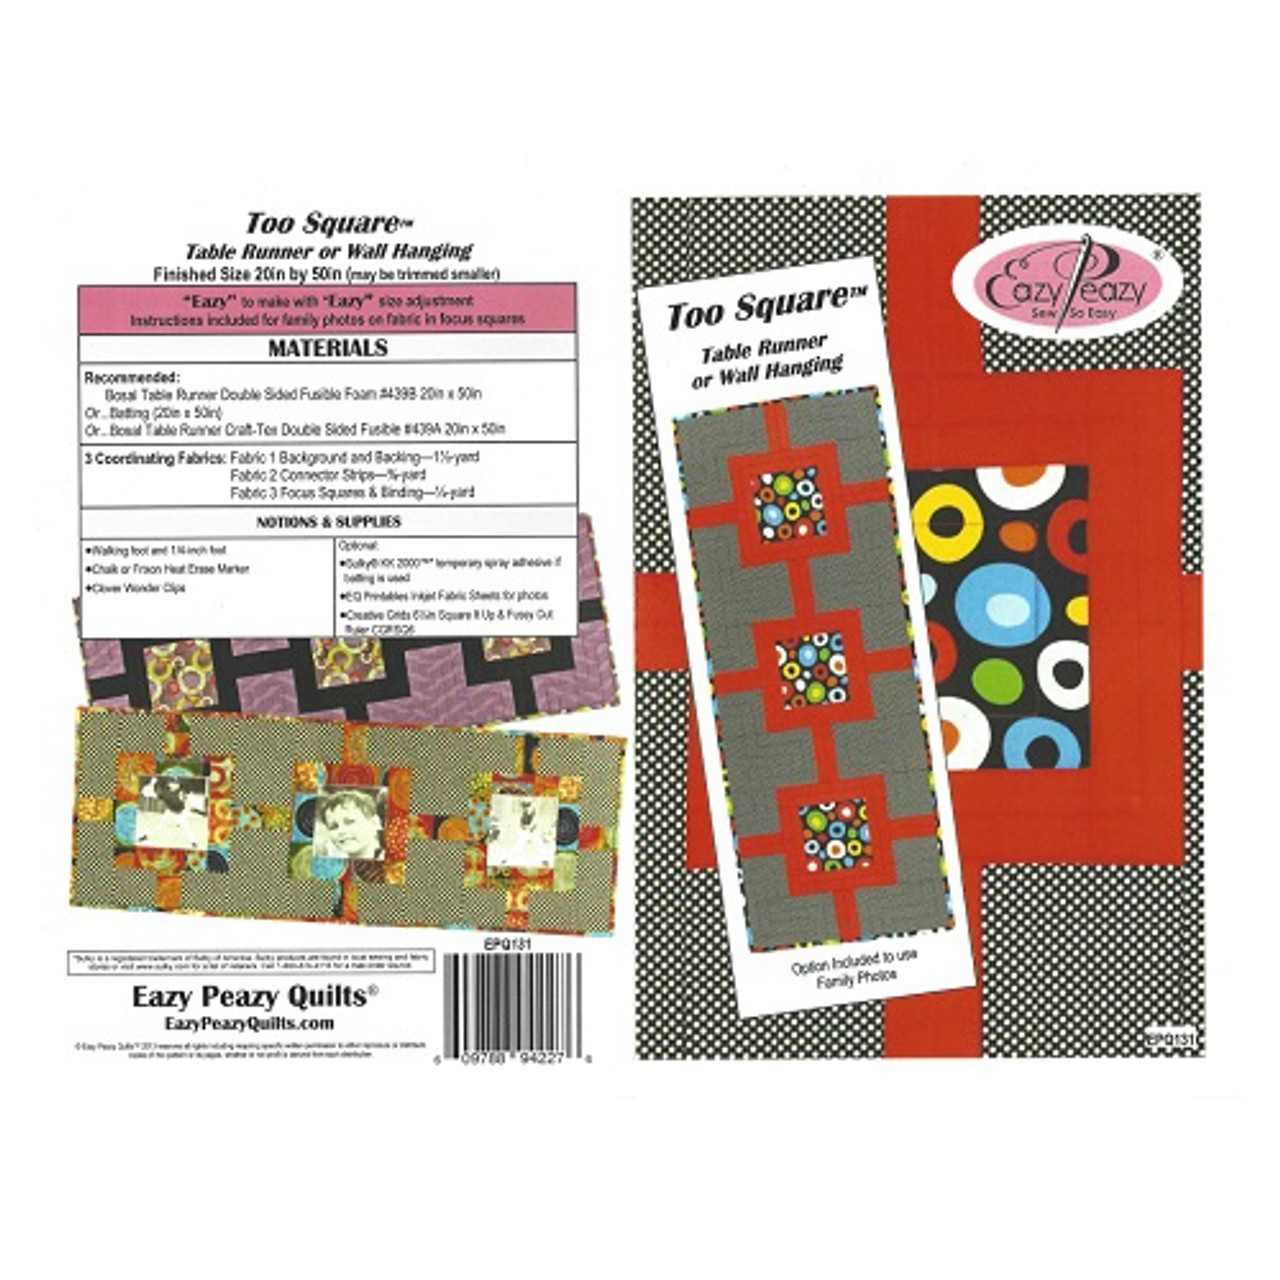 Too Square Table Runner or Wall Hanging - Eazy Peazy Quilts - Pattern